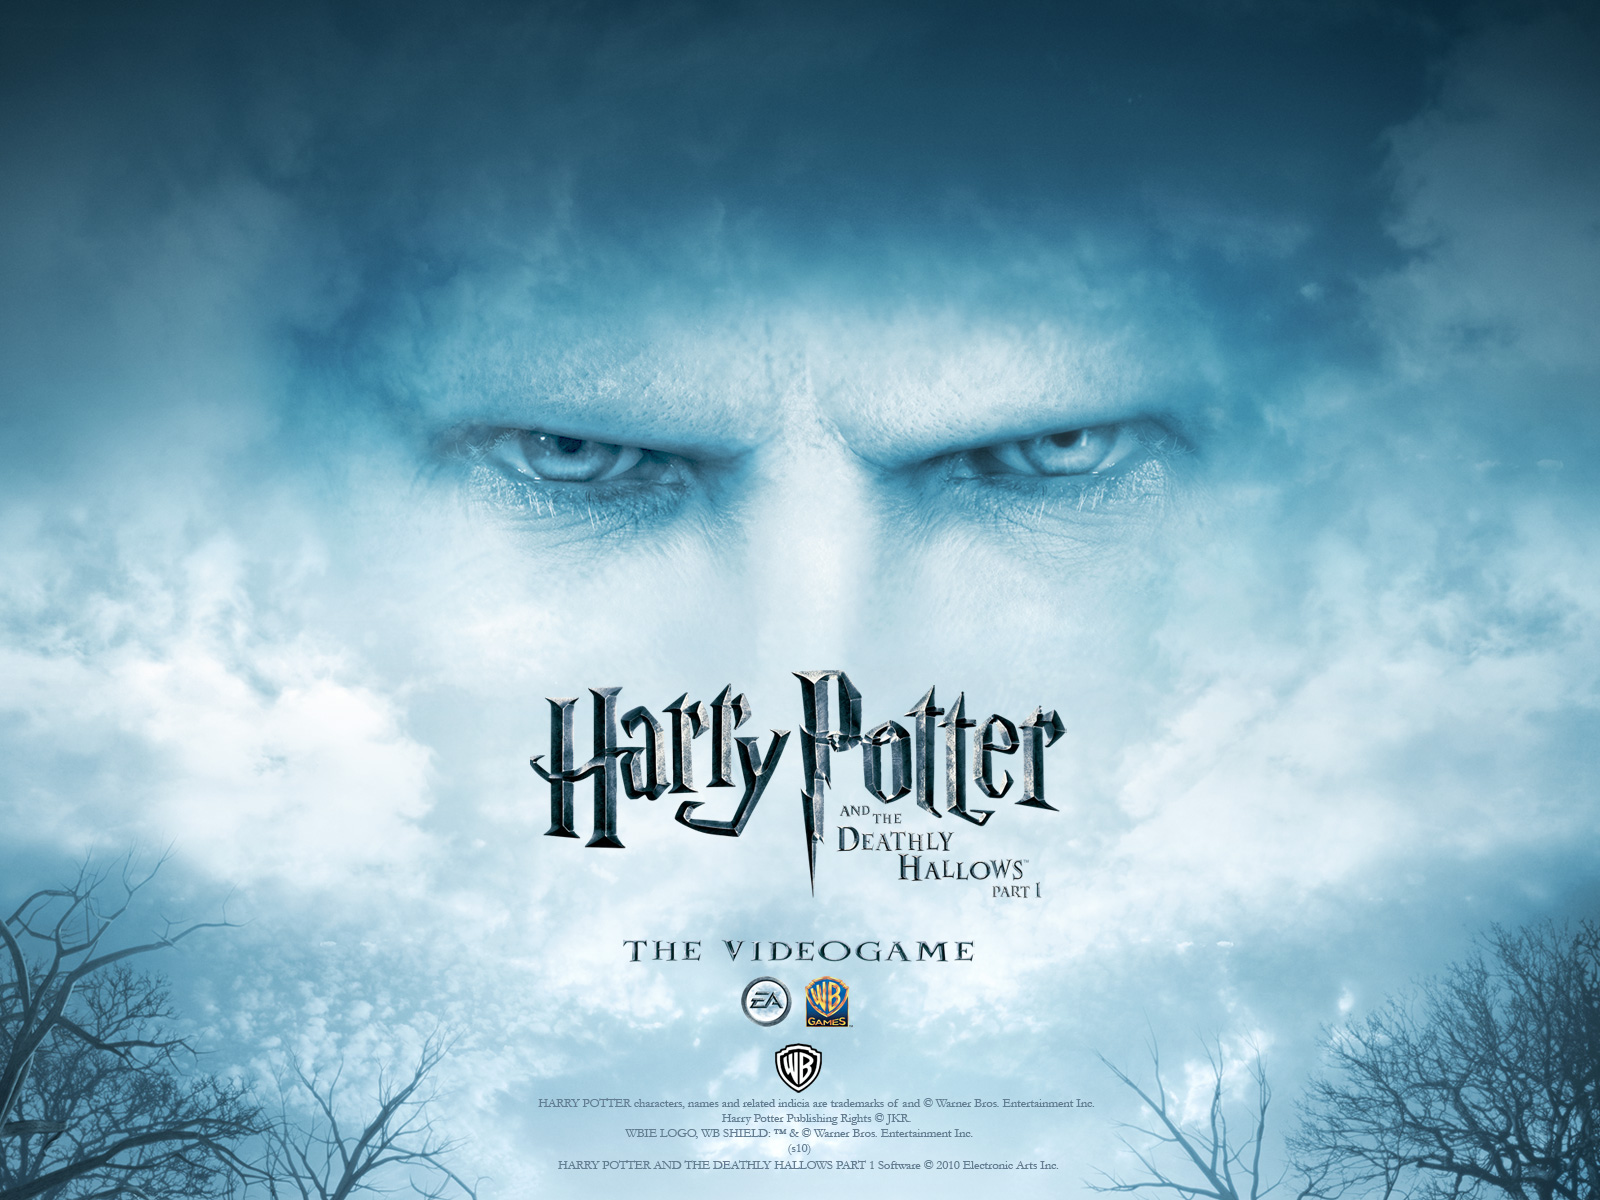 Watch Harry Potter and the Deathly Hallows: Part 1 Online